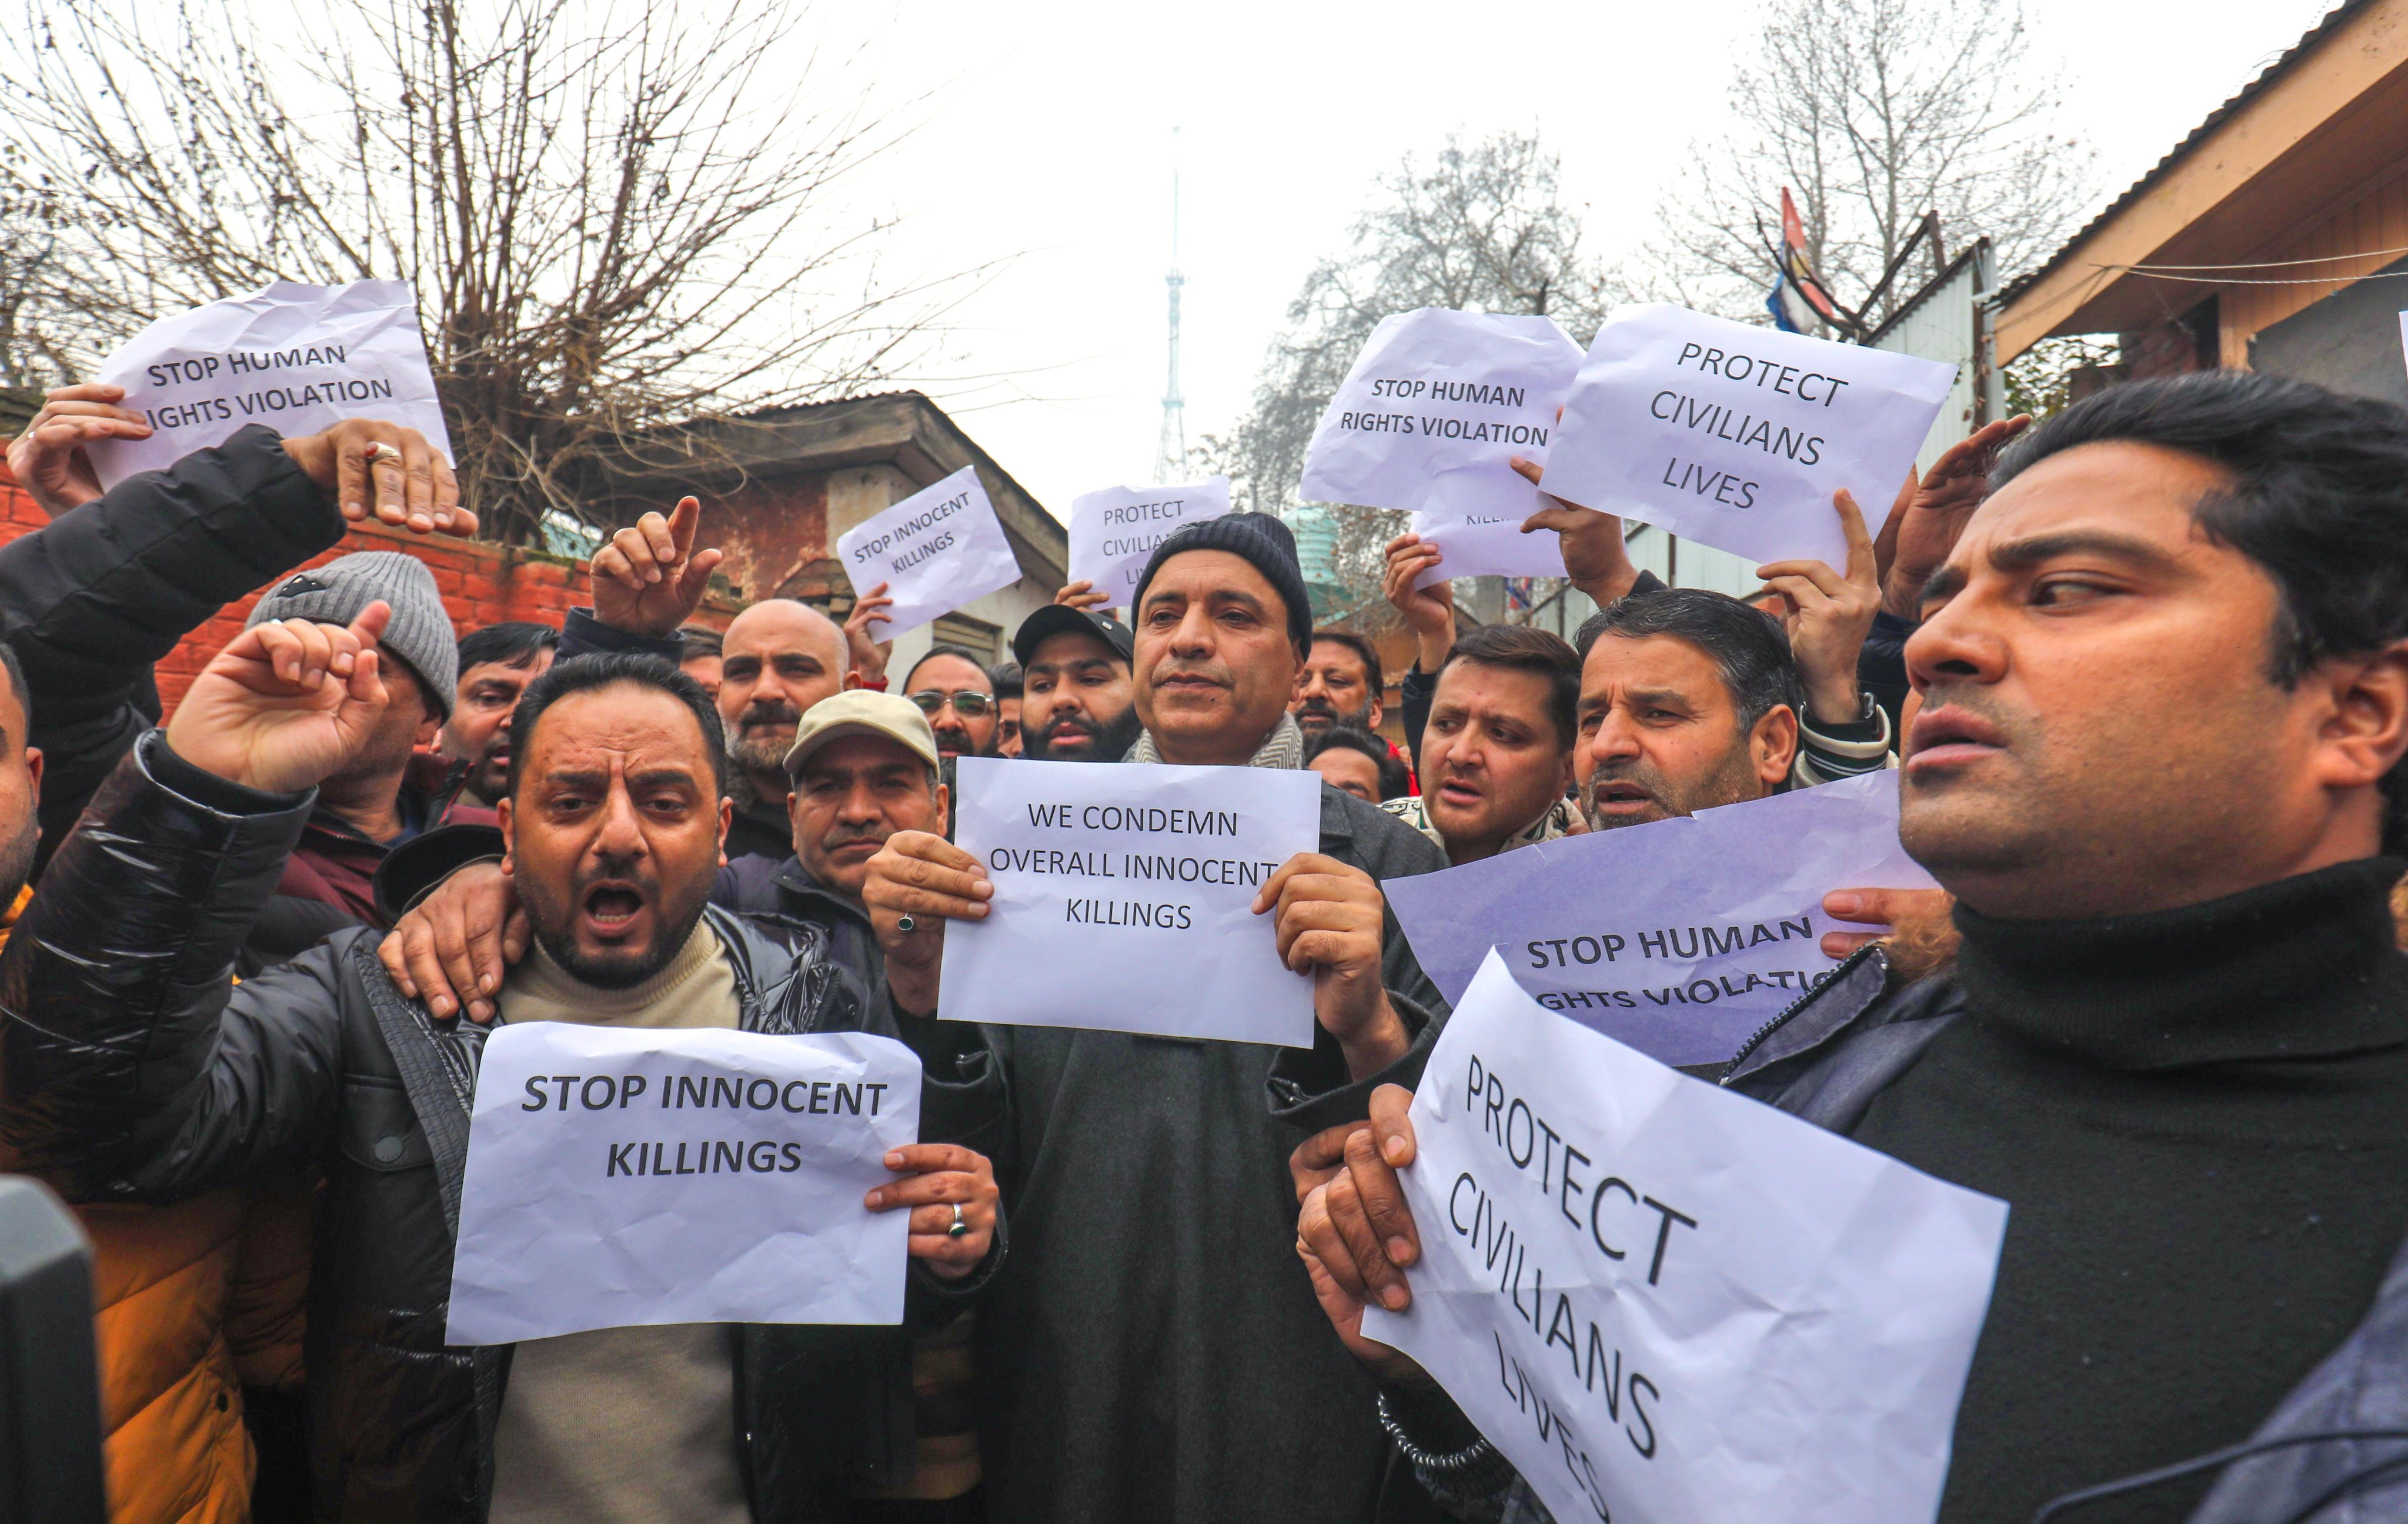 People shout slogans during a protest in Srinagar, in Indian Kashmir, on Saturday, after three civilians were killed while in army custody. Photo: EPA-EFE